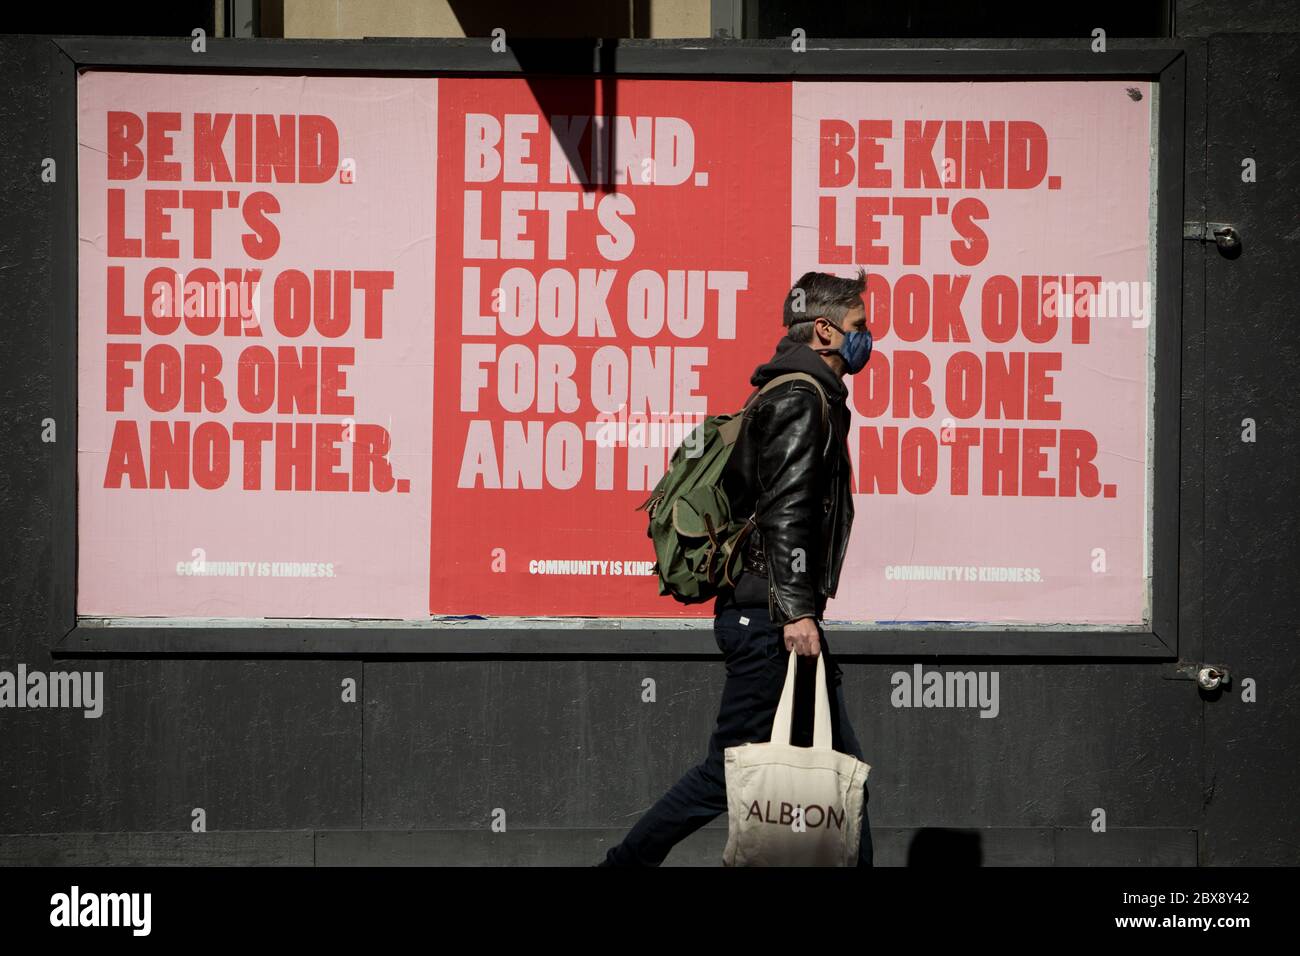 Glasgow, UK, 6th June 2020. Signs in the Merchant City saying 'Be Kind. Let's Look Out For One Another', during the time of the global CoronaVirus Covid-19 health pandemic. In Glasgow, Scotland, on 6 June 2020. Photo credit: Jeremy Sutton-Hibbert/Alamy Live News. Stock Photo